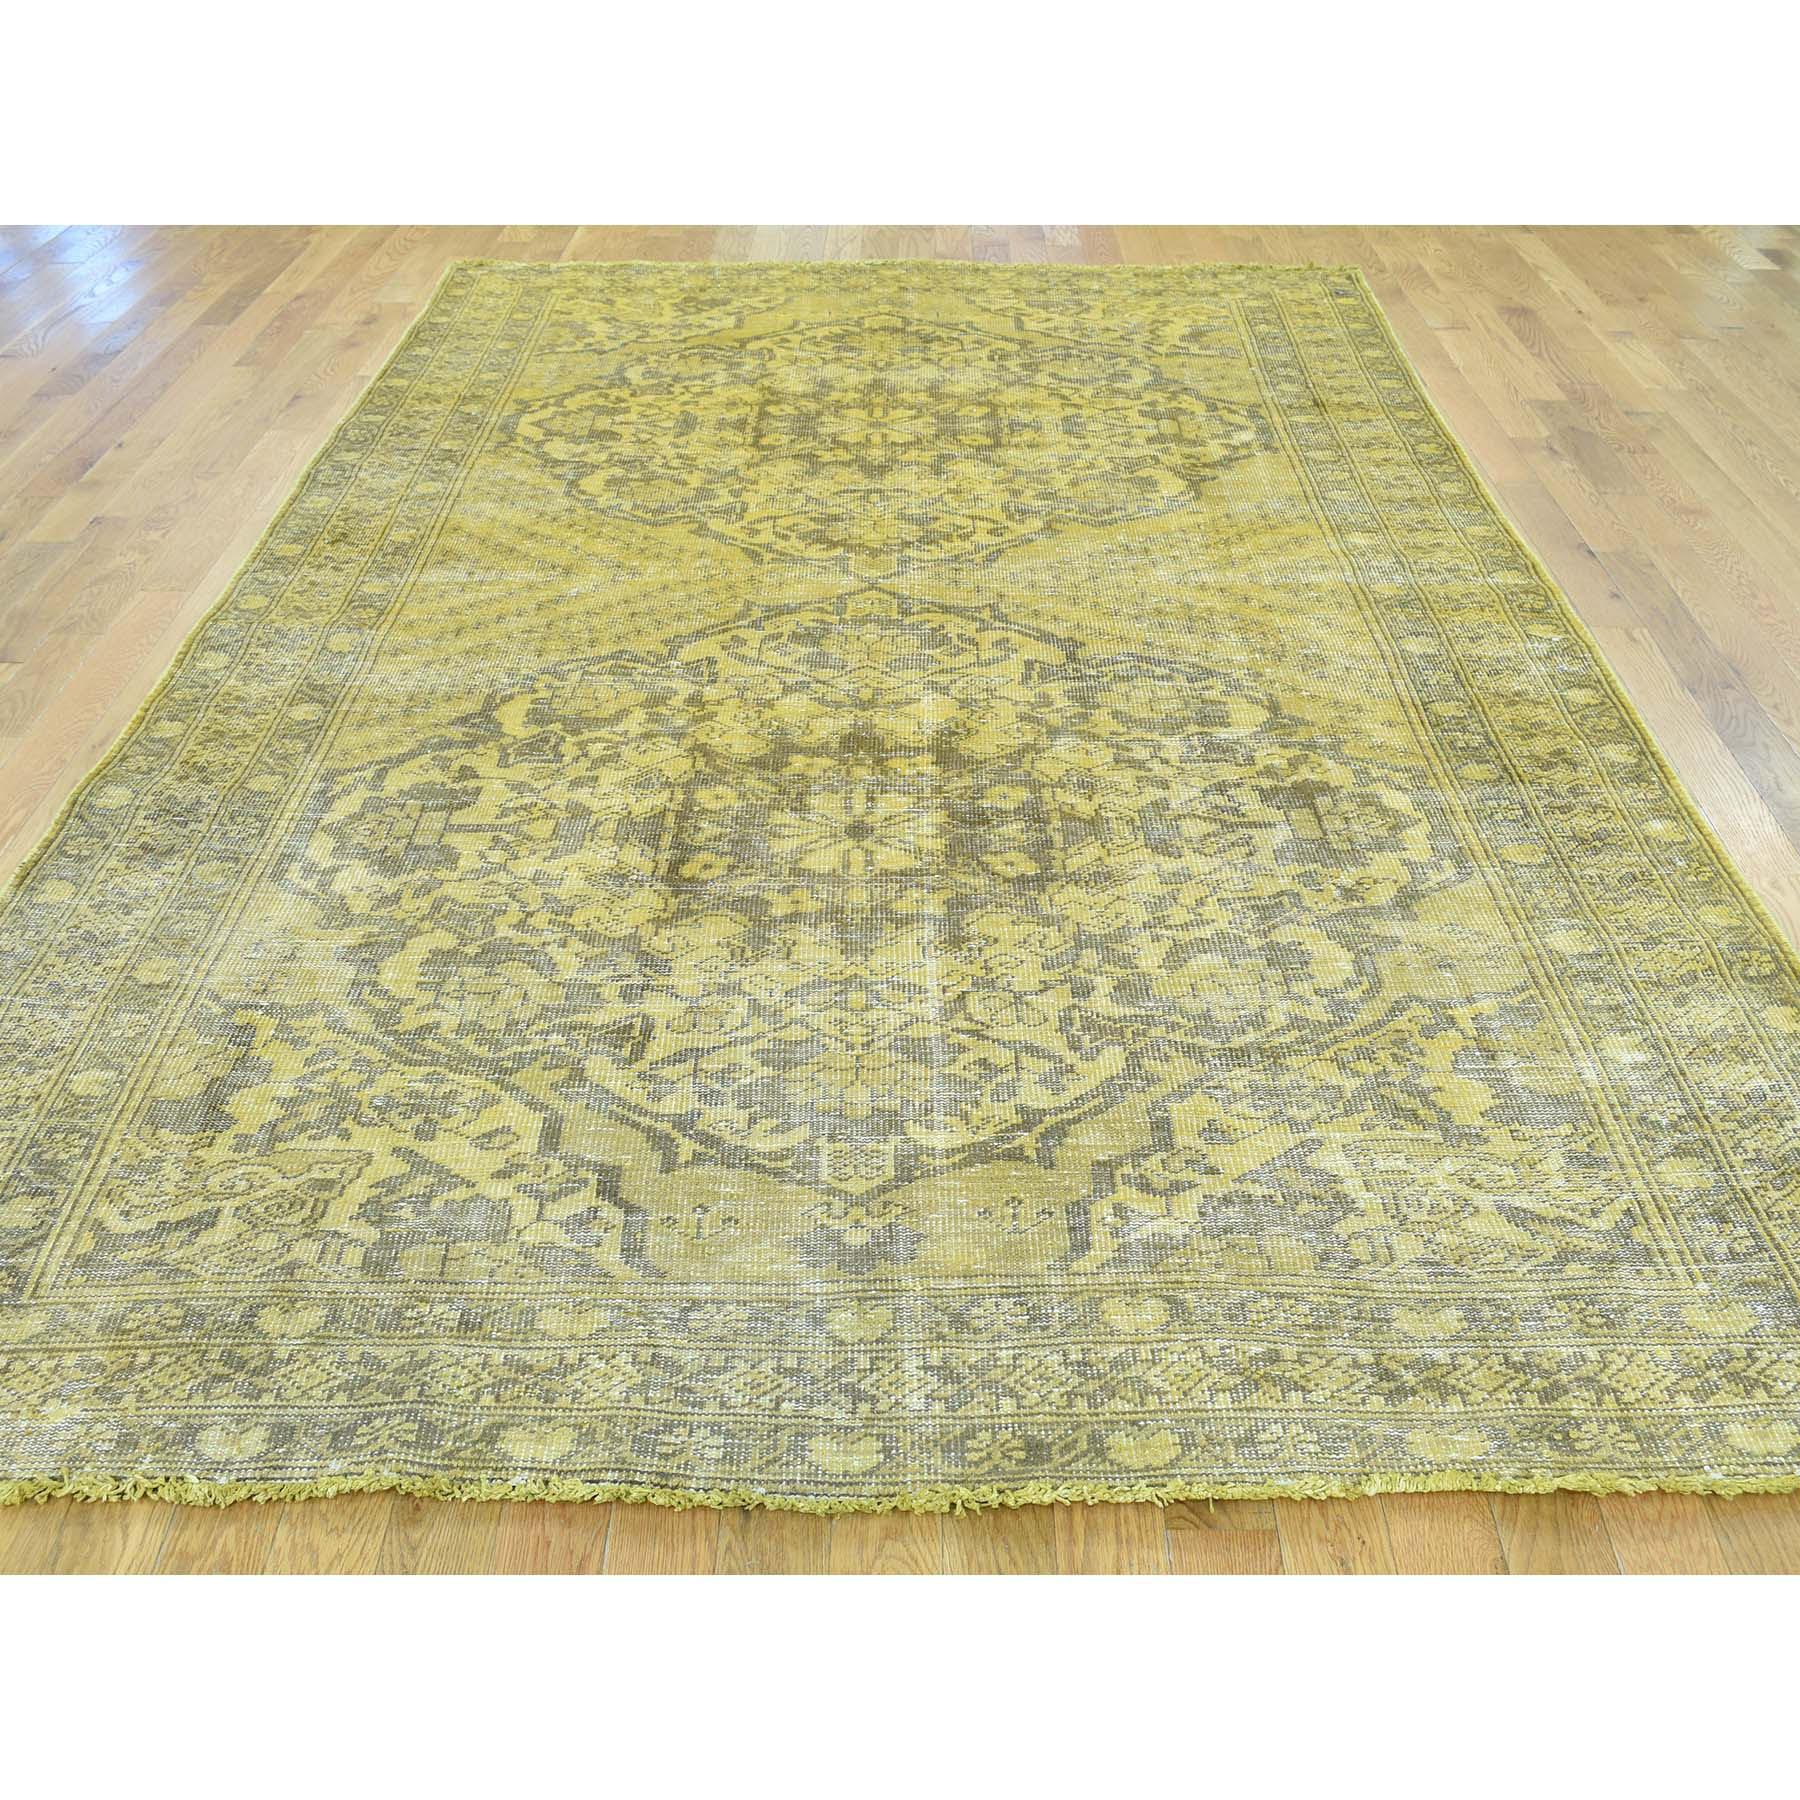 This fabulous hand-knotted carpet has been created and designed for extra strength and durability. This rug has been handcrafted for weeks in the traditional method that is used to make
Exact Rug Size in Feet and Inches : 6'5